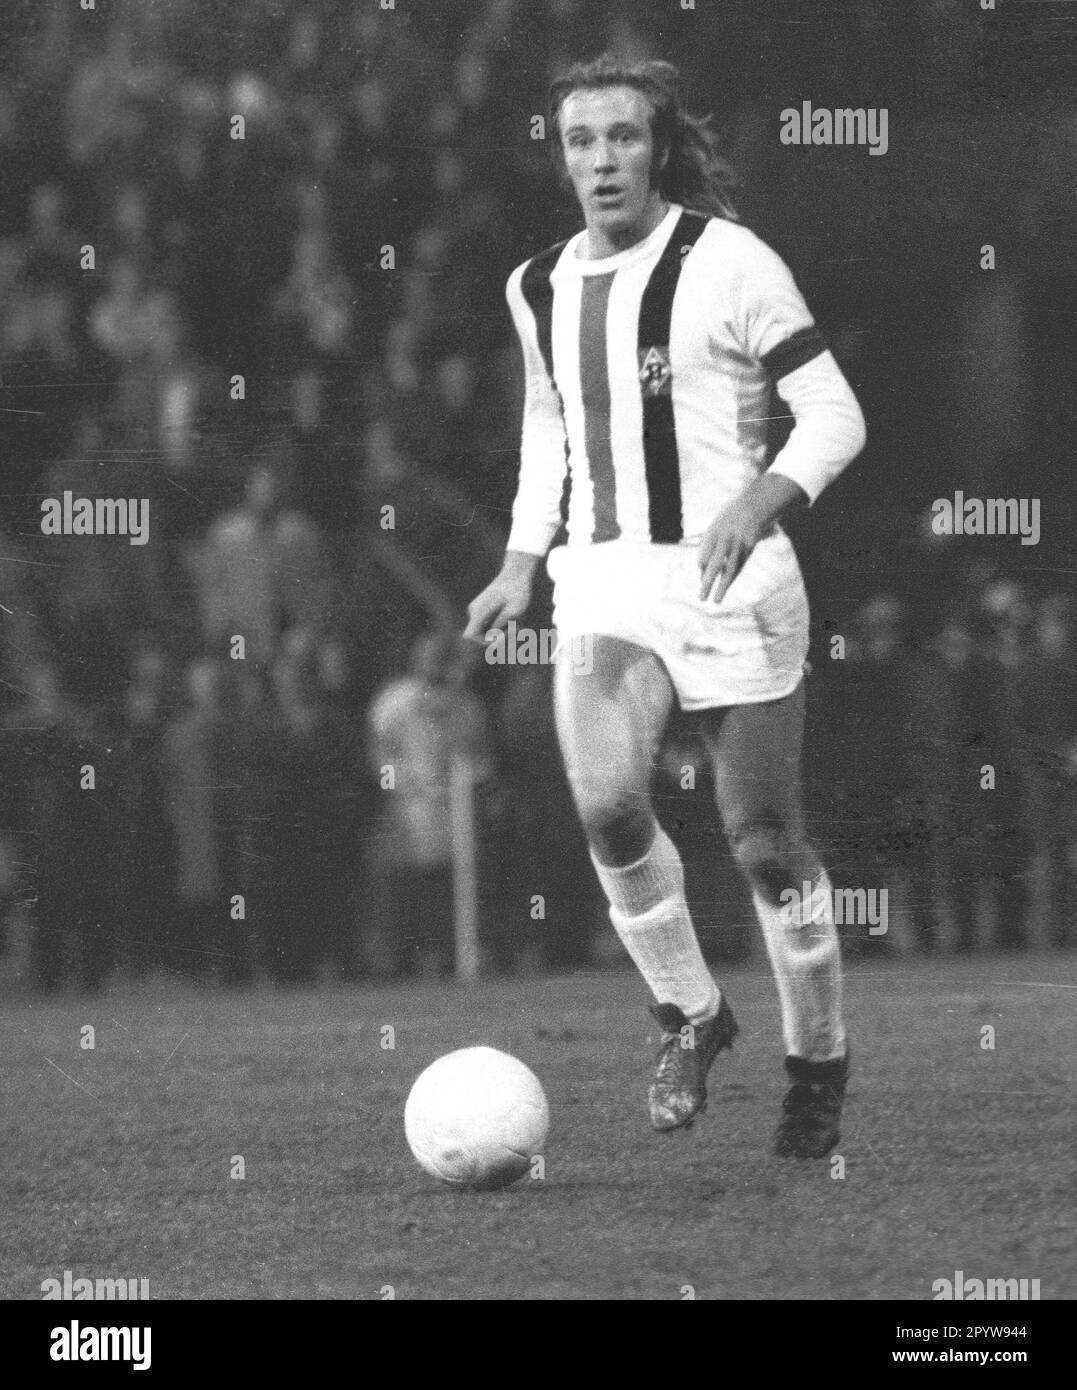 UEFA - Cup Borussia Mönchengladbach - 1. FC Kaiserslautern 7:1 /20.03.1973/ Günter Netzer (Borussia) in action Editorial use only ! for journalistic purposes only ! [automated translation] Stock Photo